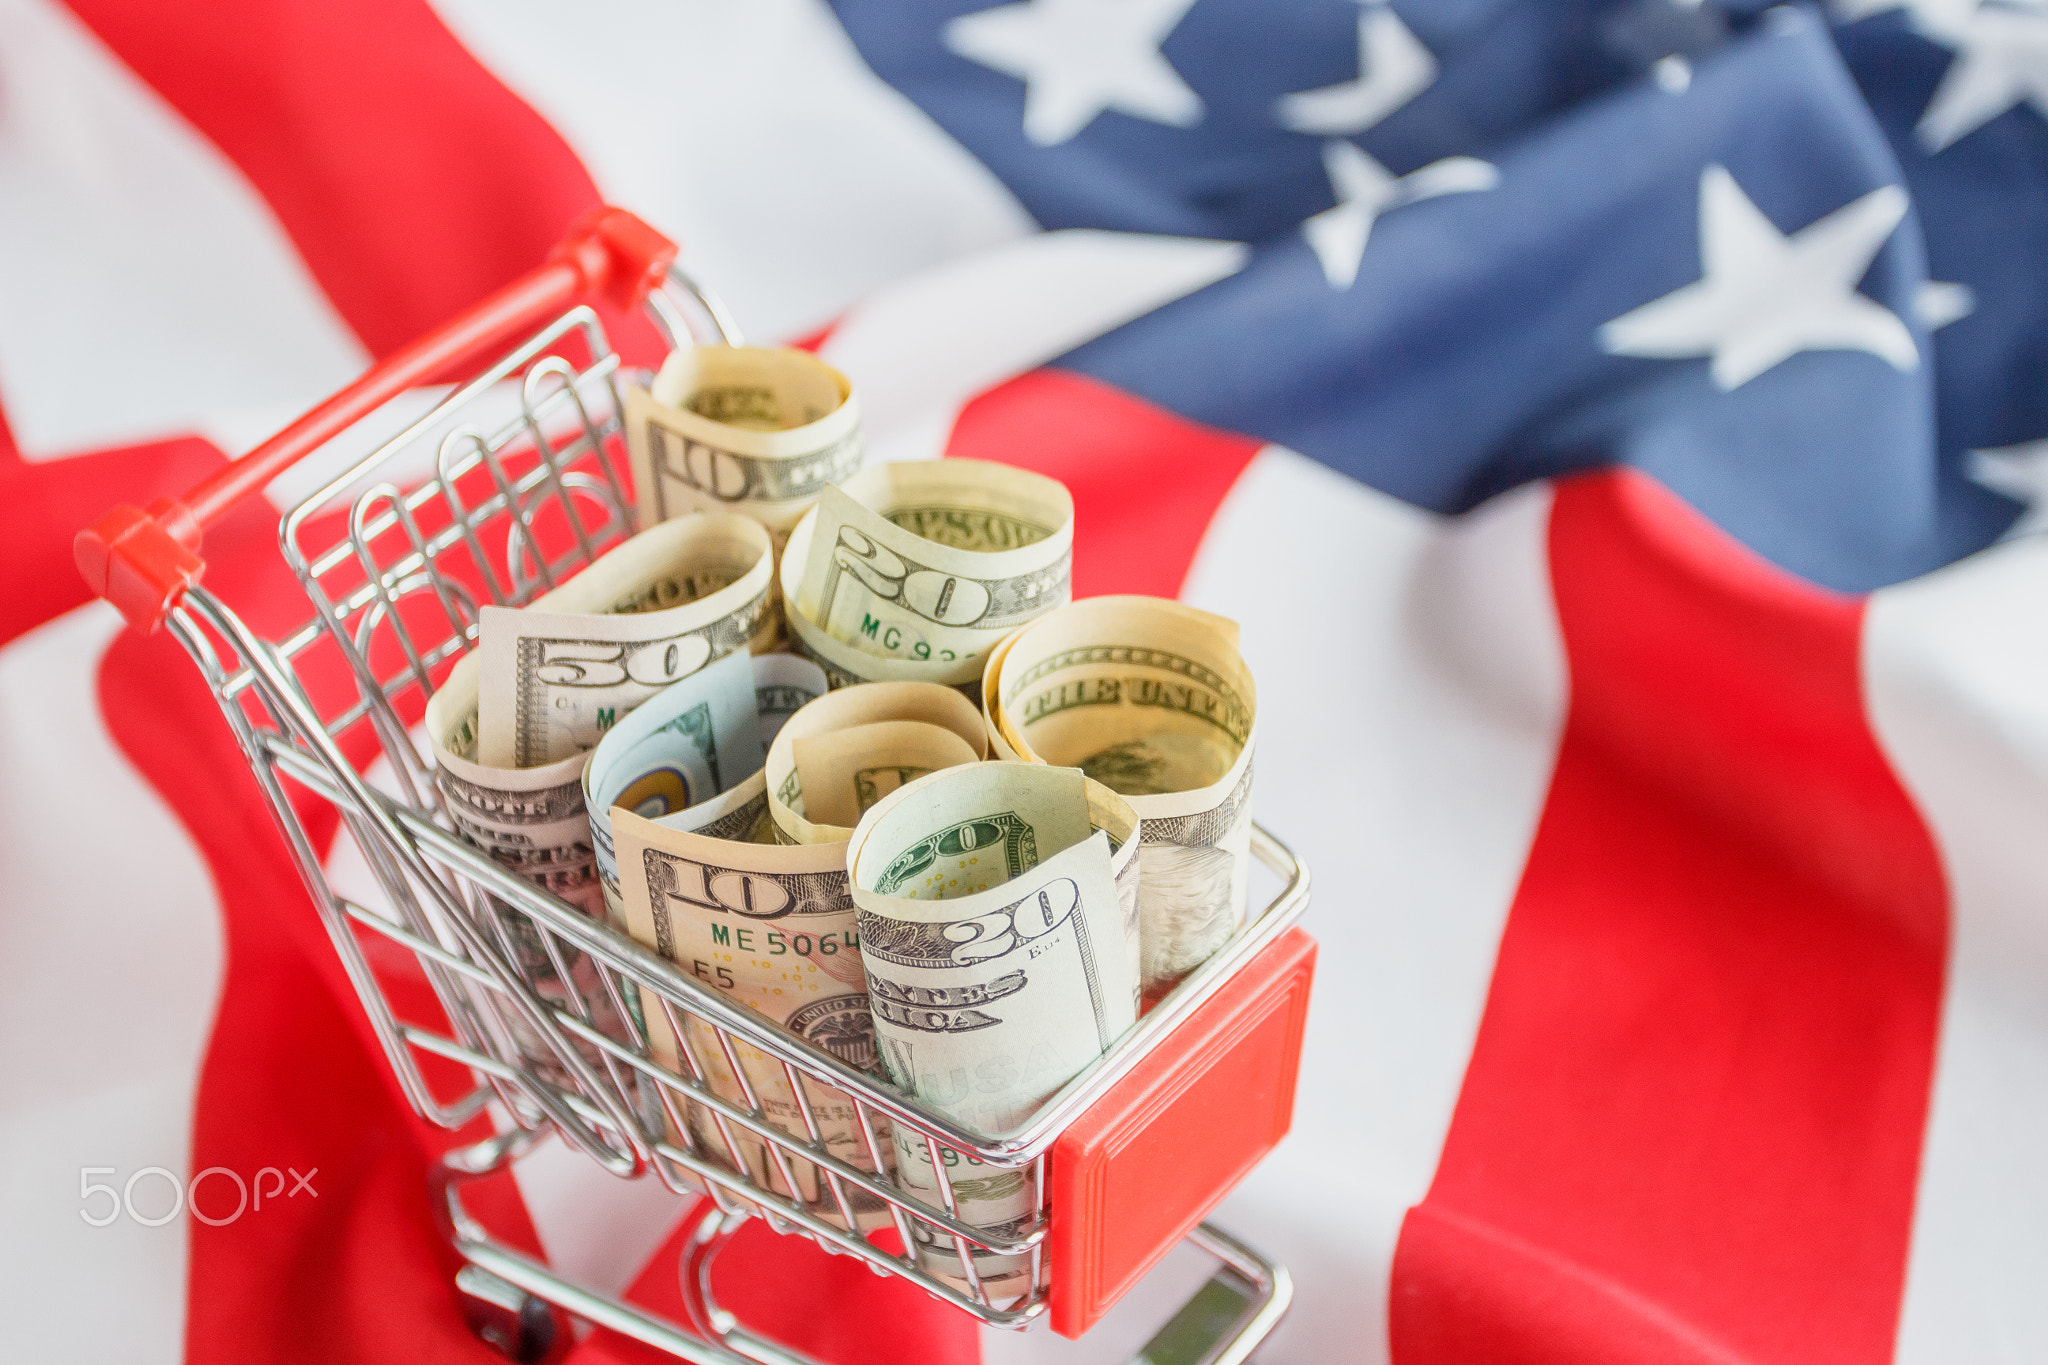 Shopping cart with American dollars inside on the national flag of United States of America